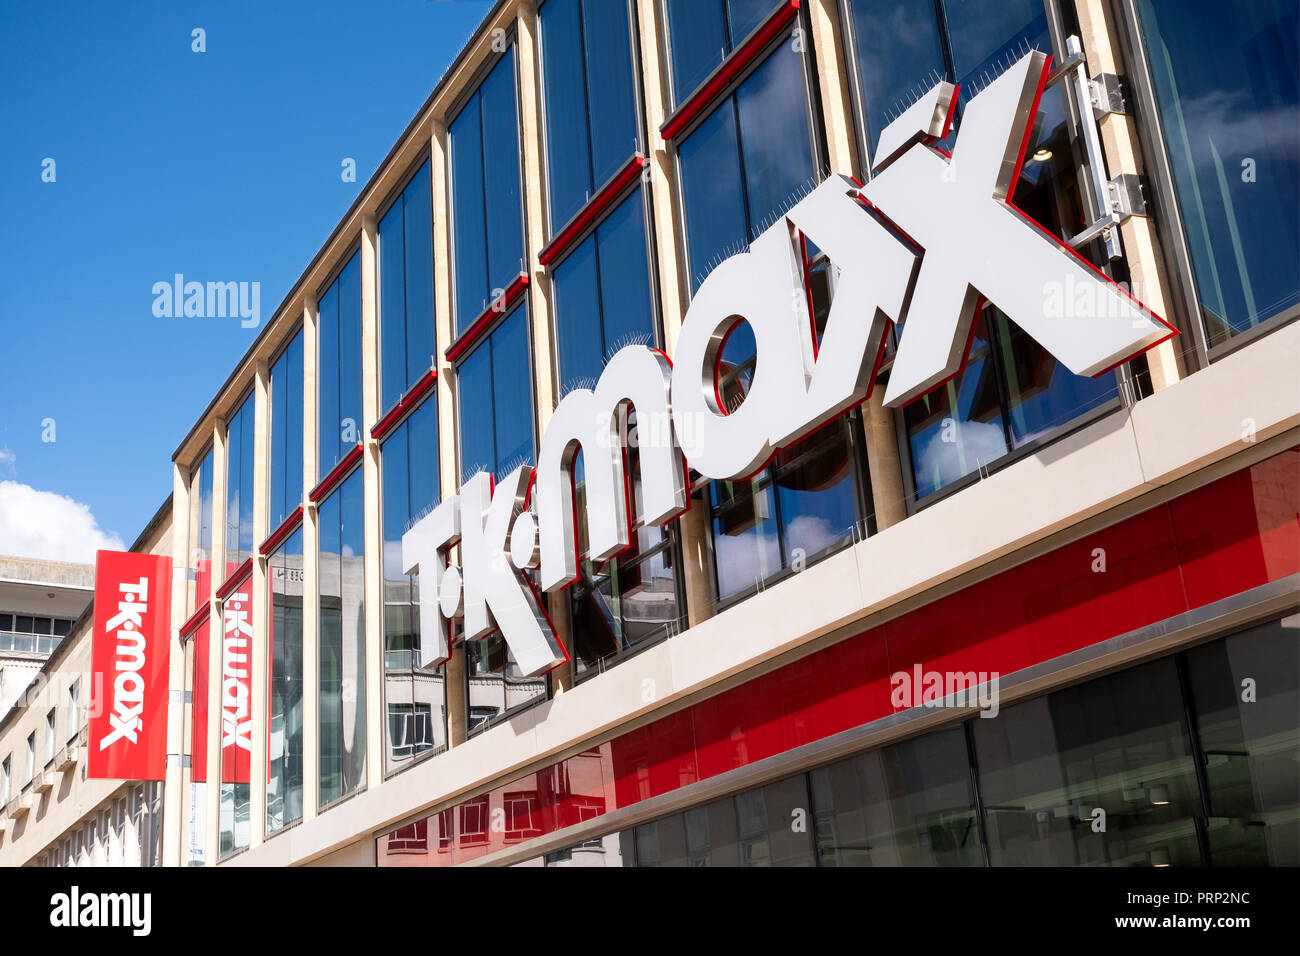 A large tK Maxx store in central Bristol UK clearly showing the company name and branding on the front of the building Stock Photo